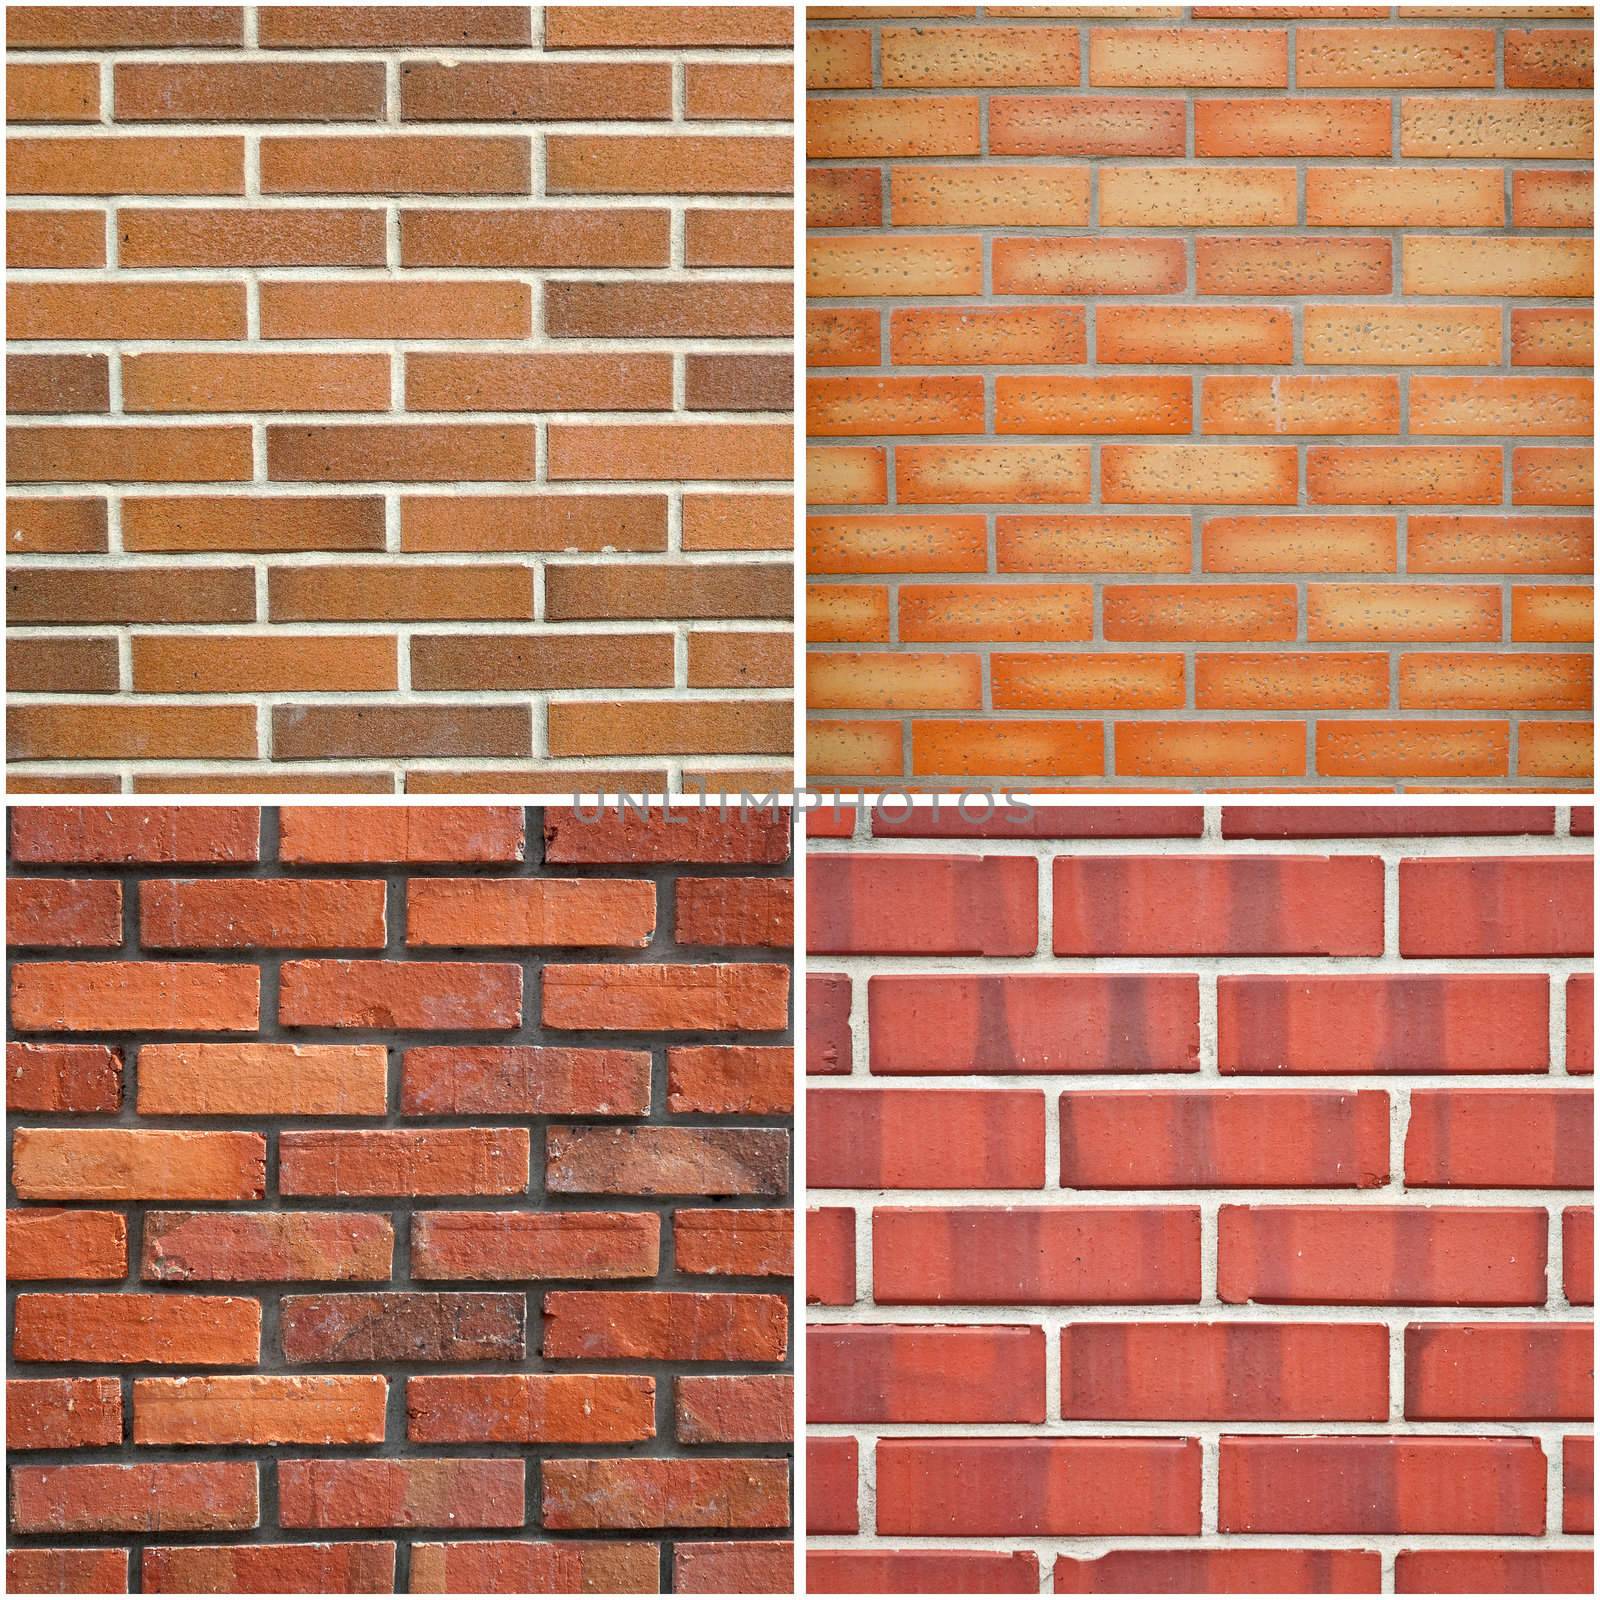 Set of Red brick wall textures background.